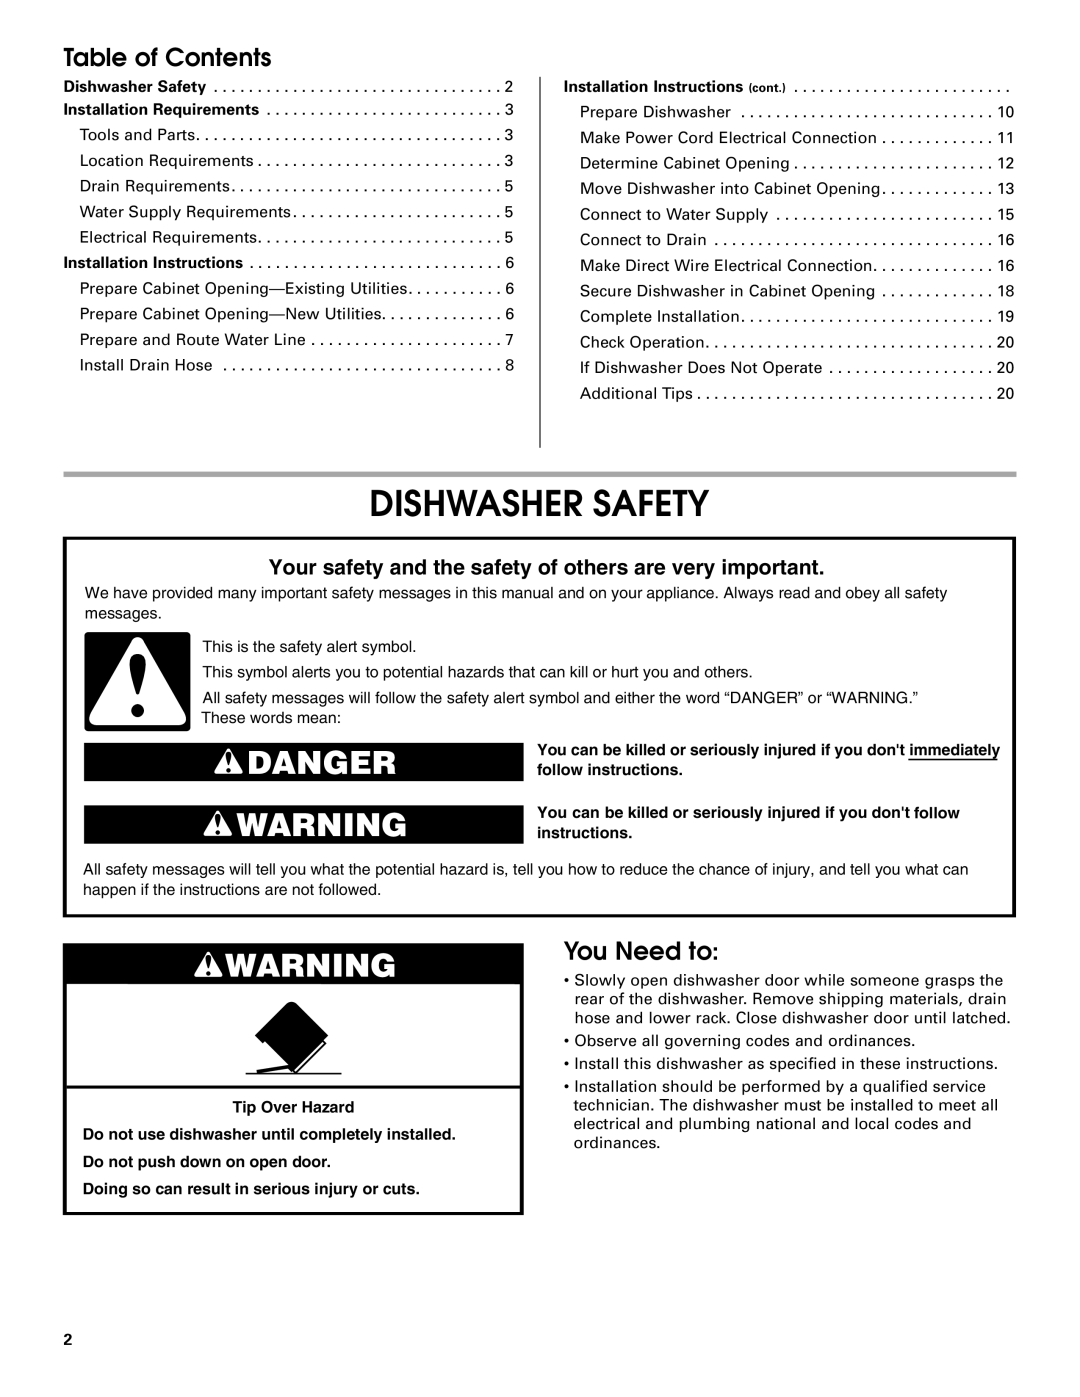 Whirlpool TUD8700SQ Dishwasher Safety, Danger, Your safety and the safety of others are very important, Tip Over Hazard 